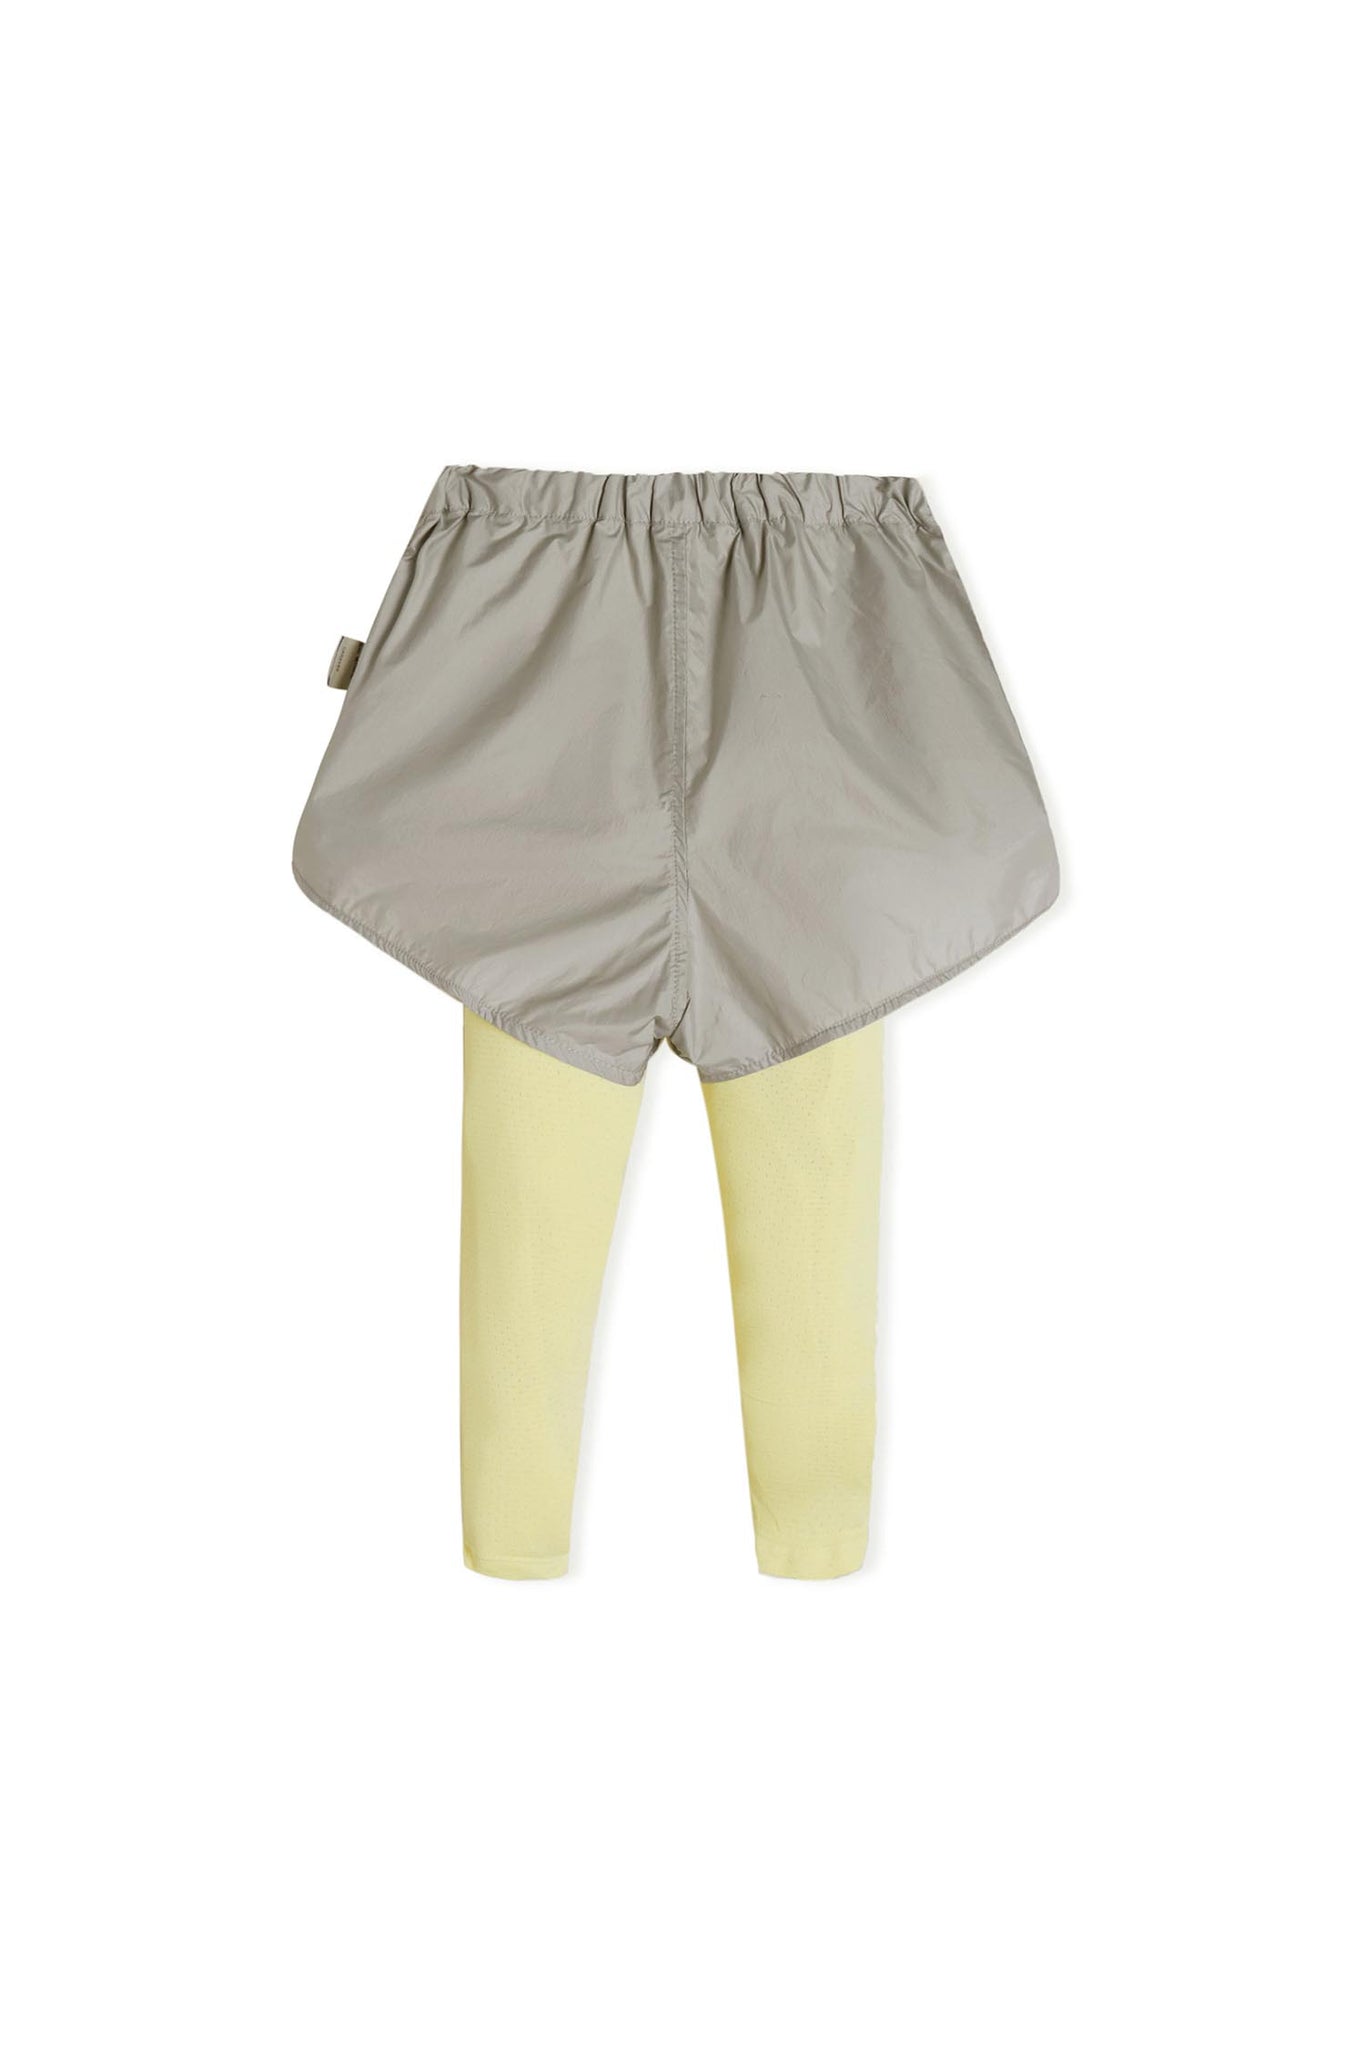 Pants / jnby for mini Color-Contrasted Mock Two-Piece Pants